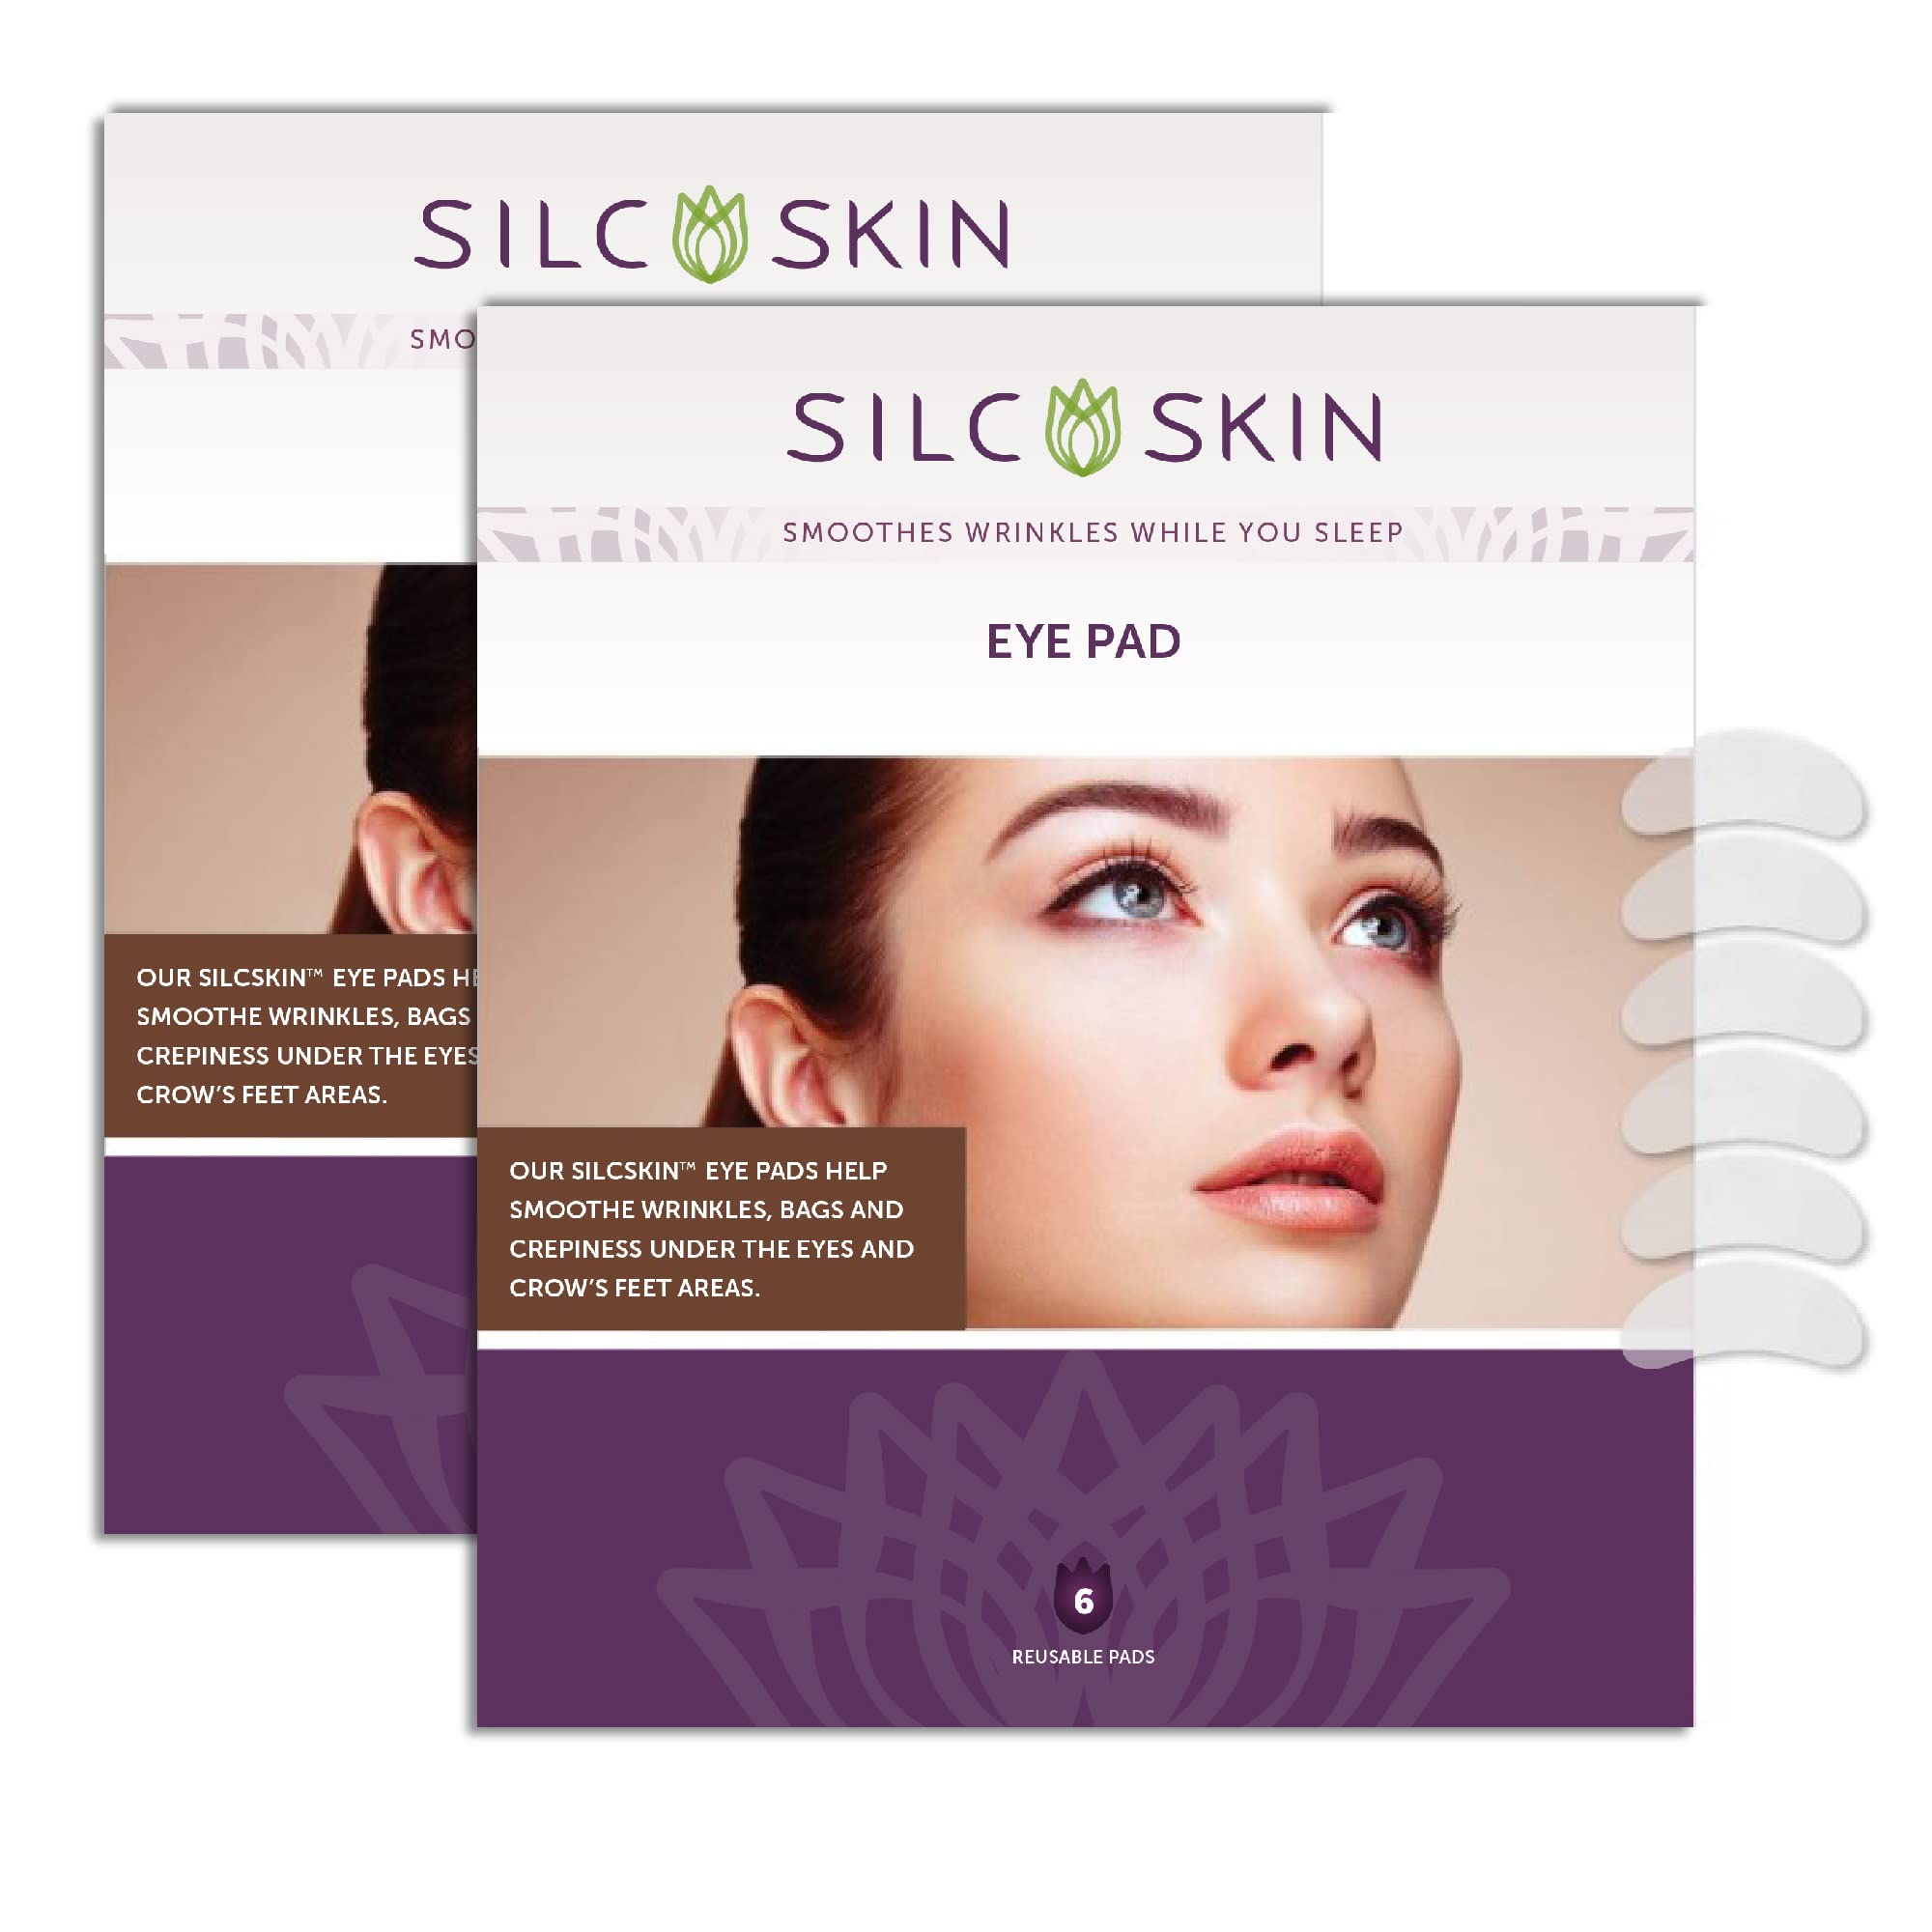 SilcSkin Silicone Eye Pads for Fine Lines, Crepey Skin, and Puffiness - Reusable Overnight Face Pads - 2 Packs